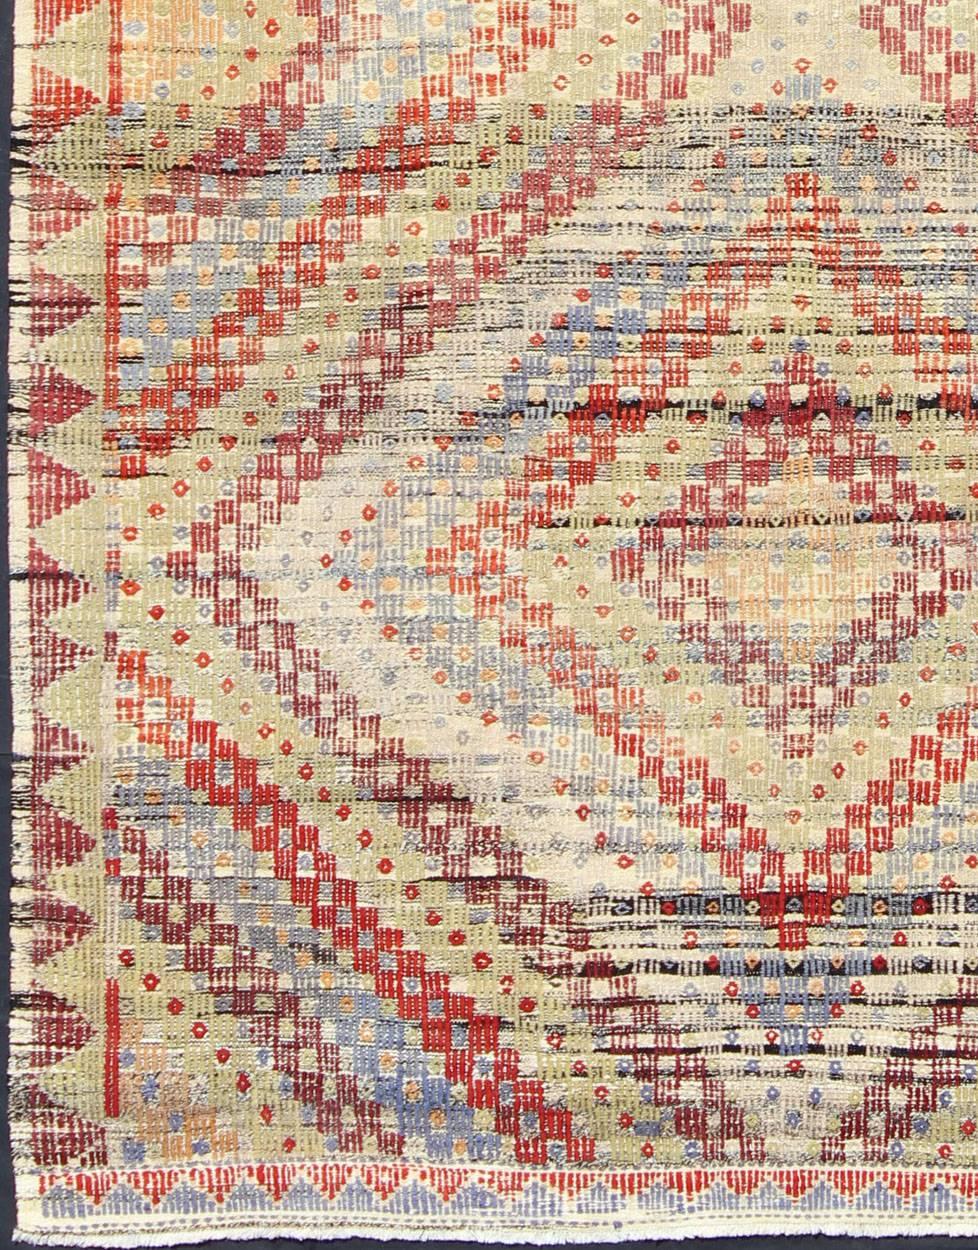 Measures: 6'9'' x 10'9''.
Featuring a large diamond pattern with a spotted and speckled assortment of geometric checkered elements, this unique vintage Kilim showcases an array of muted color tones that have been softened by age. Colors include